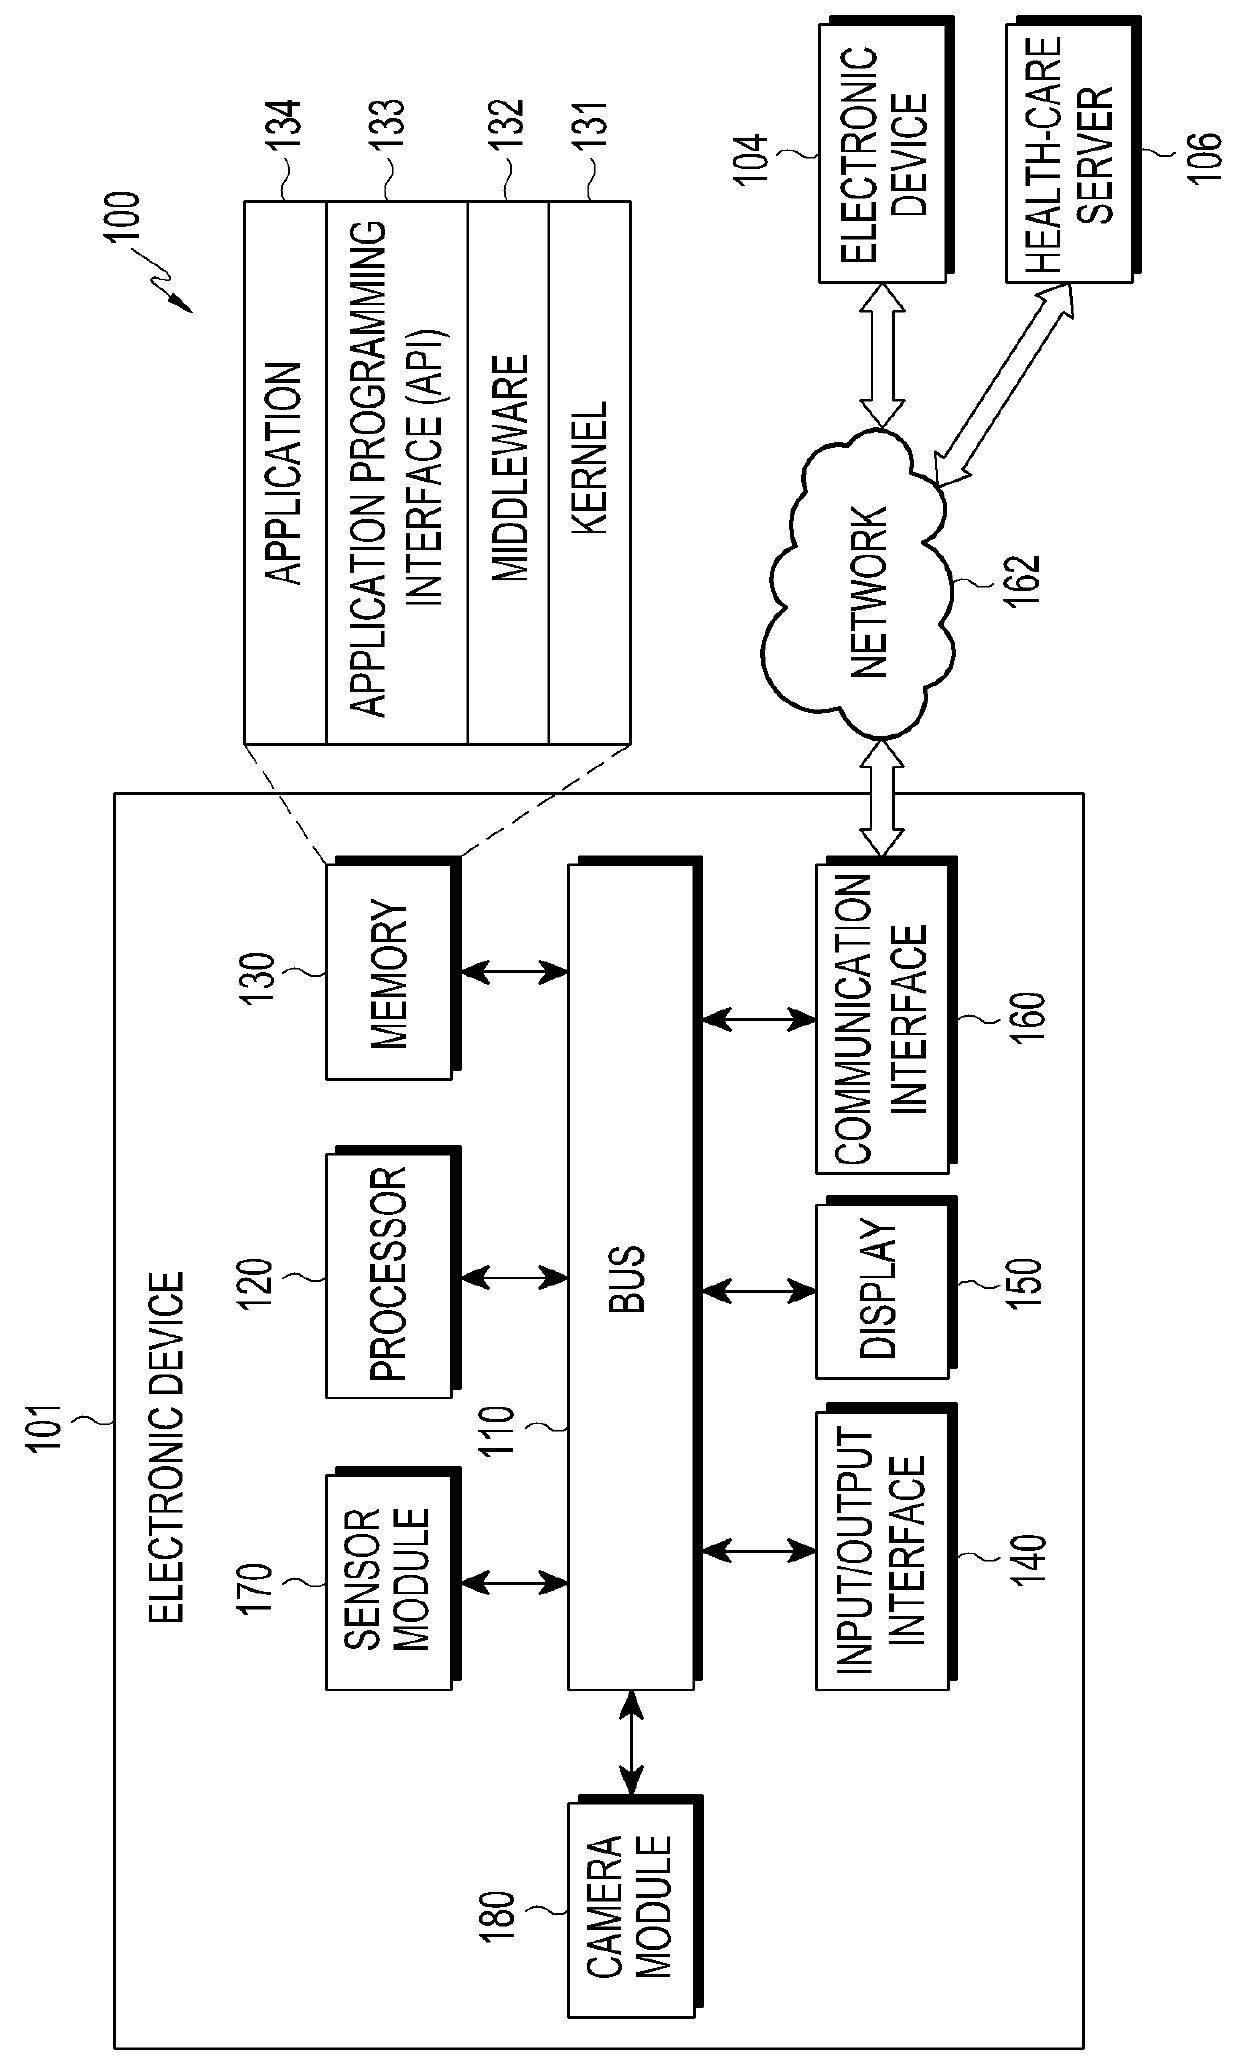 Apparatus and method for enhancing accuracy of a contactless body temperature measurement